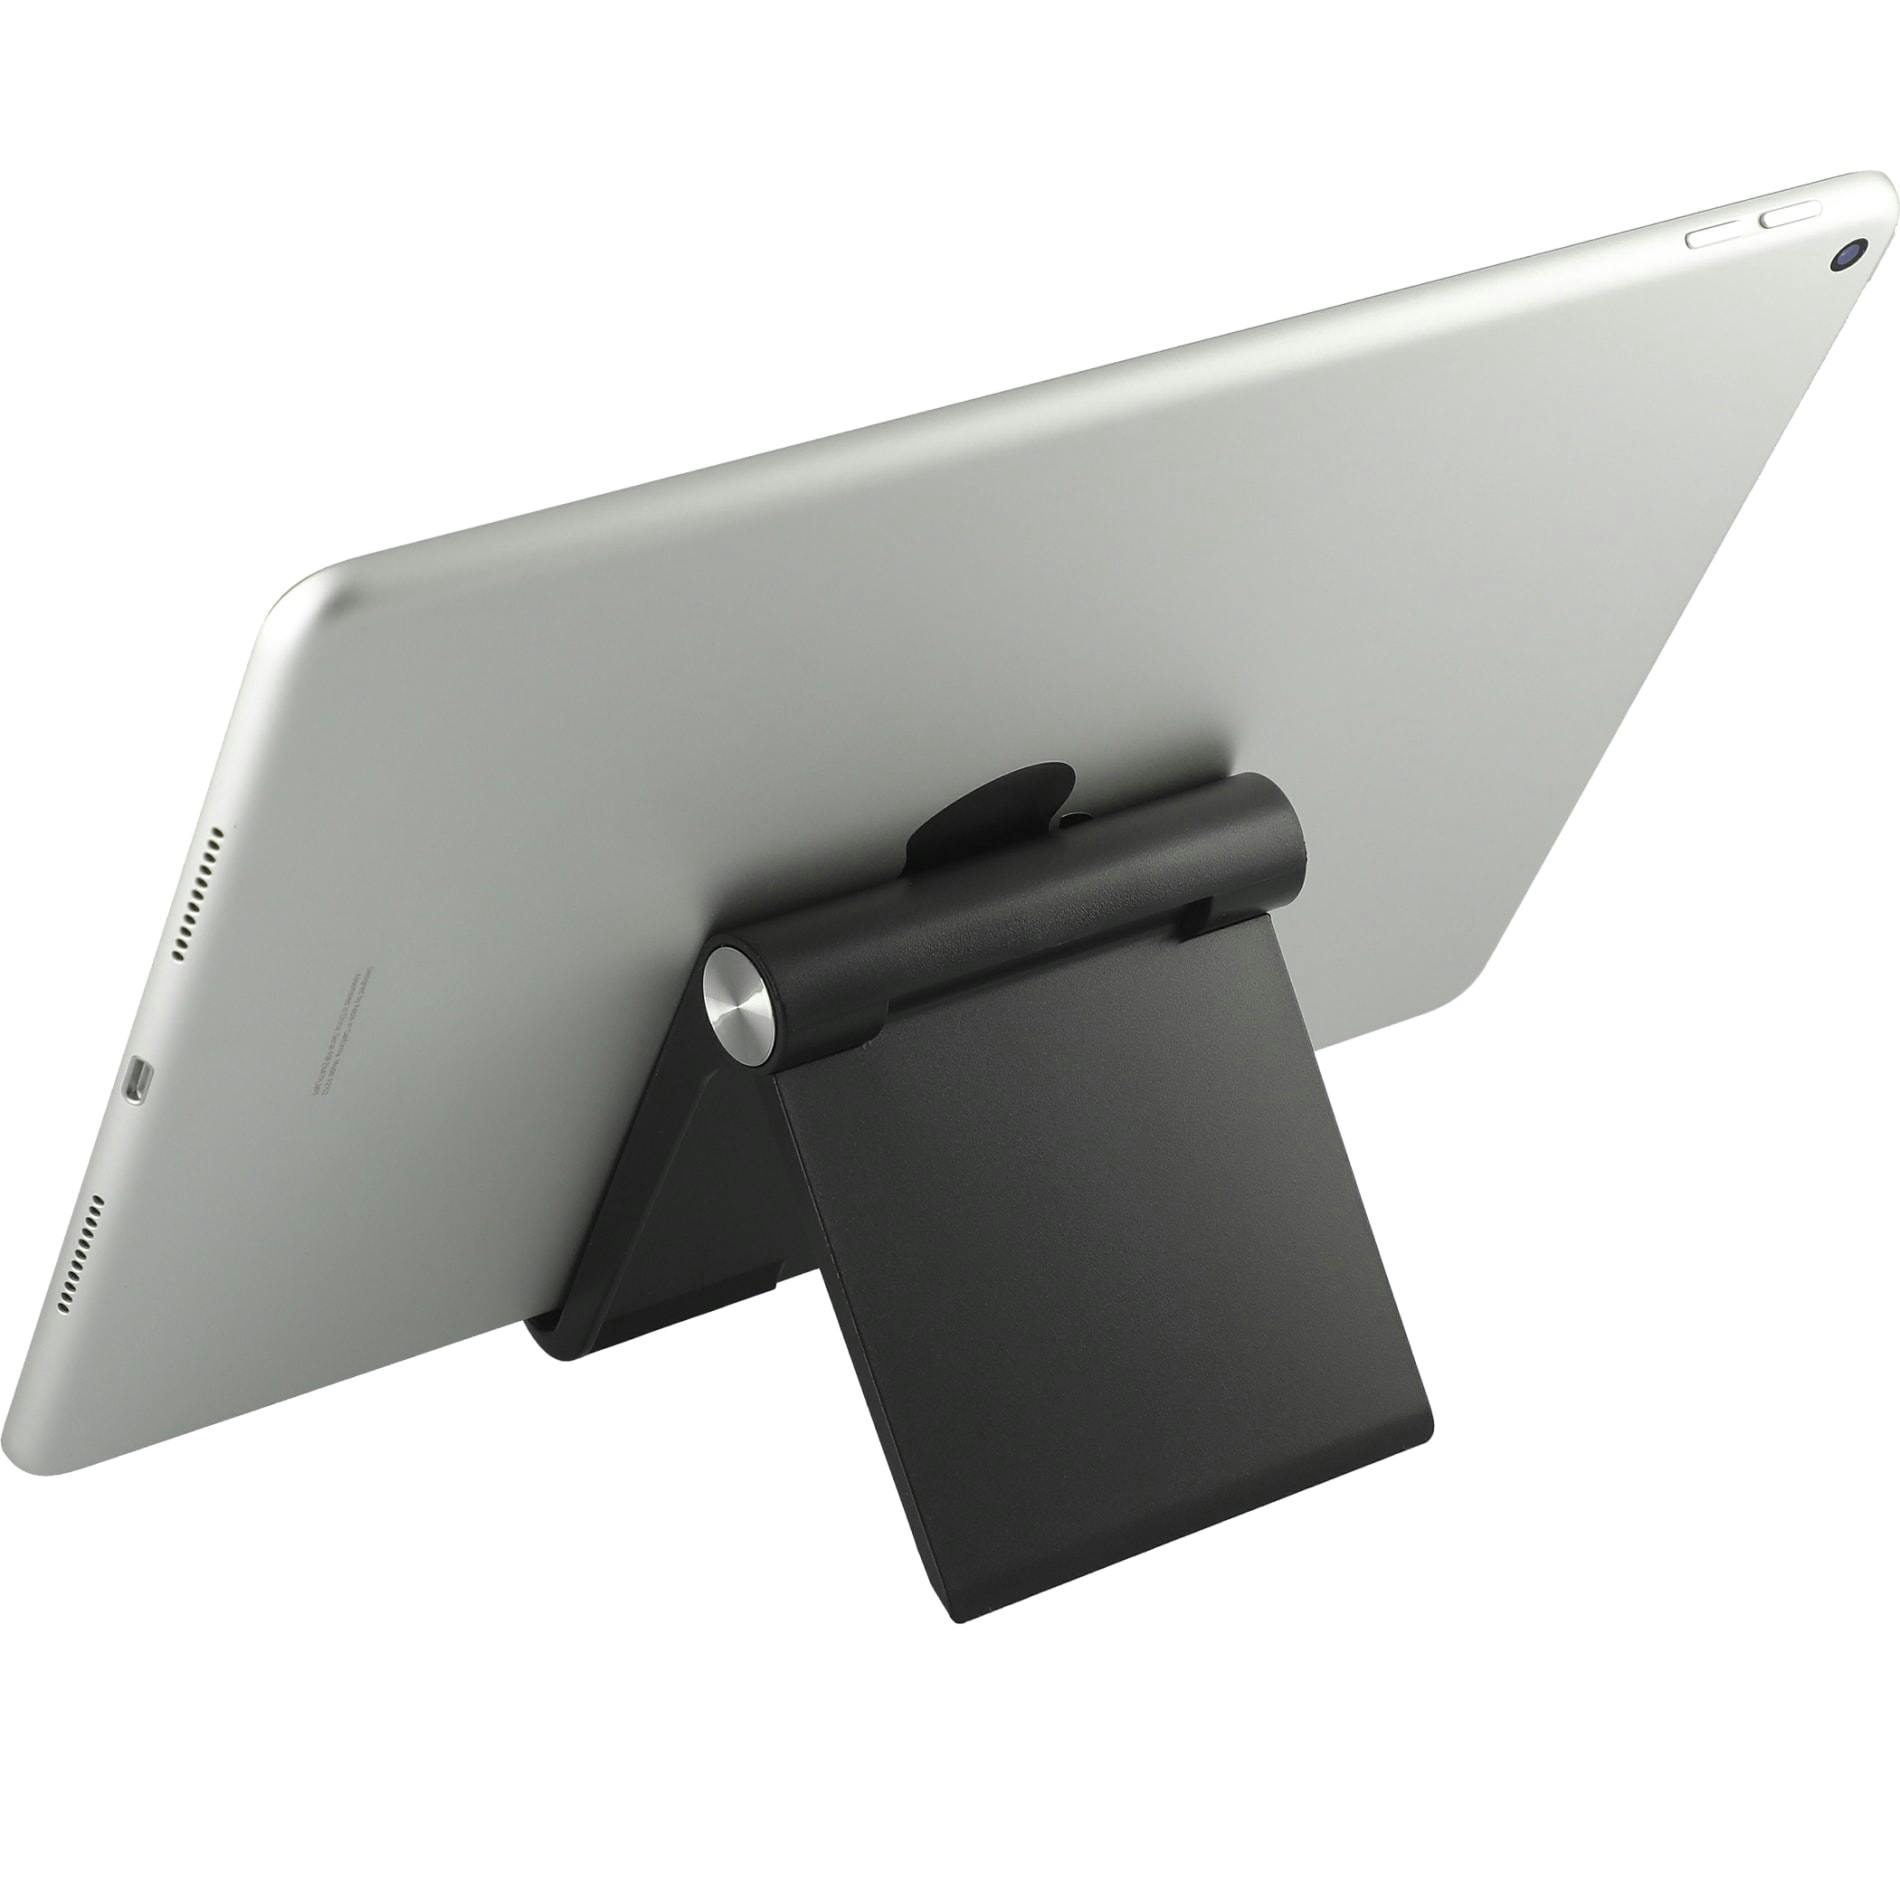 Resty Phone and Tablet Stand - additional Image 3